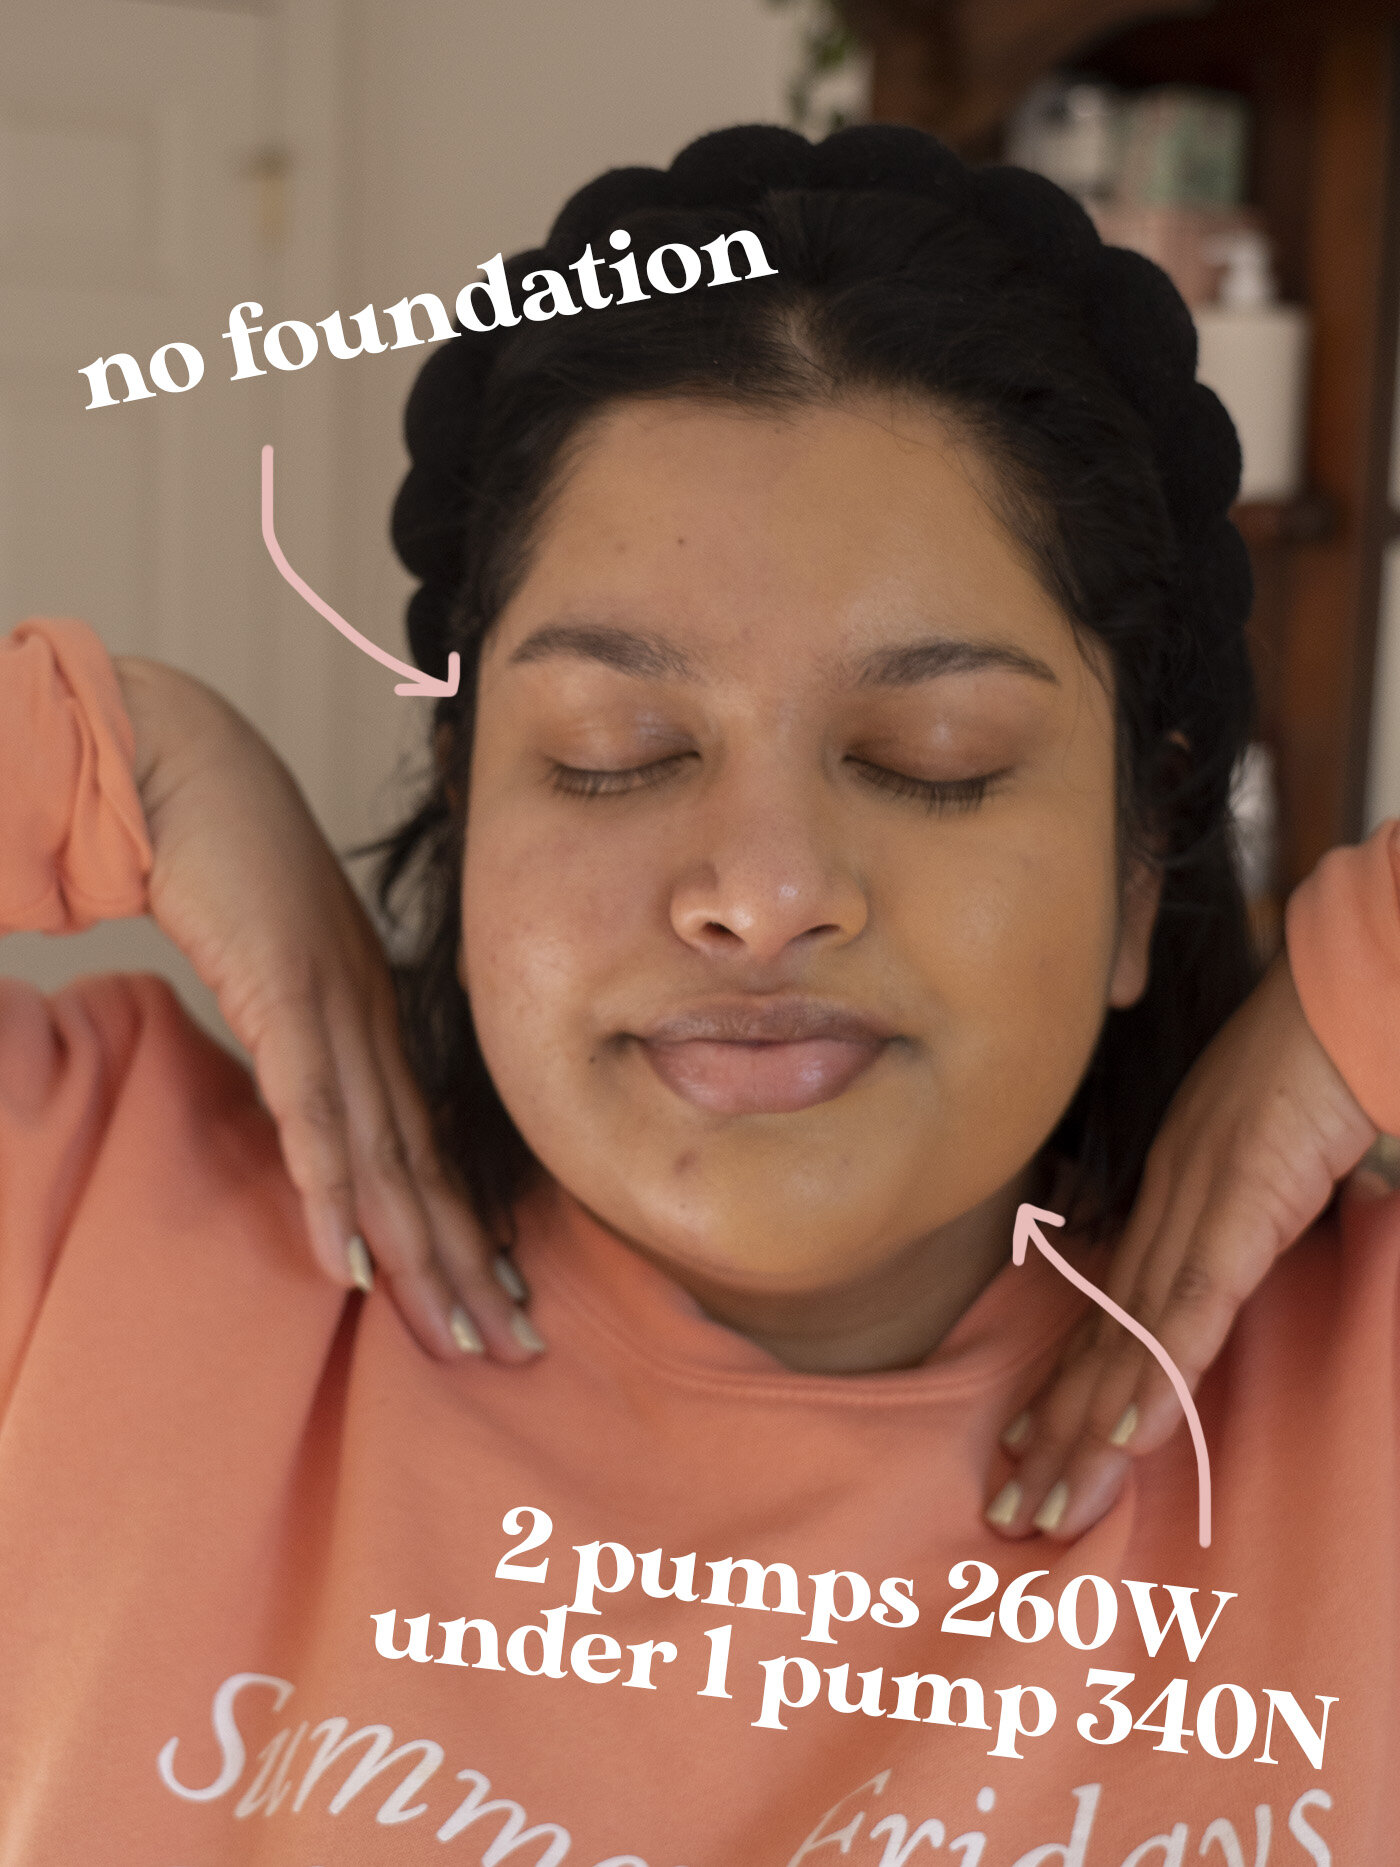 gucci natural finish fluid foundation review swatches shade match tan medium brown skin.jpg